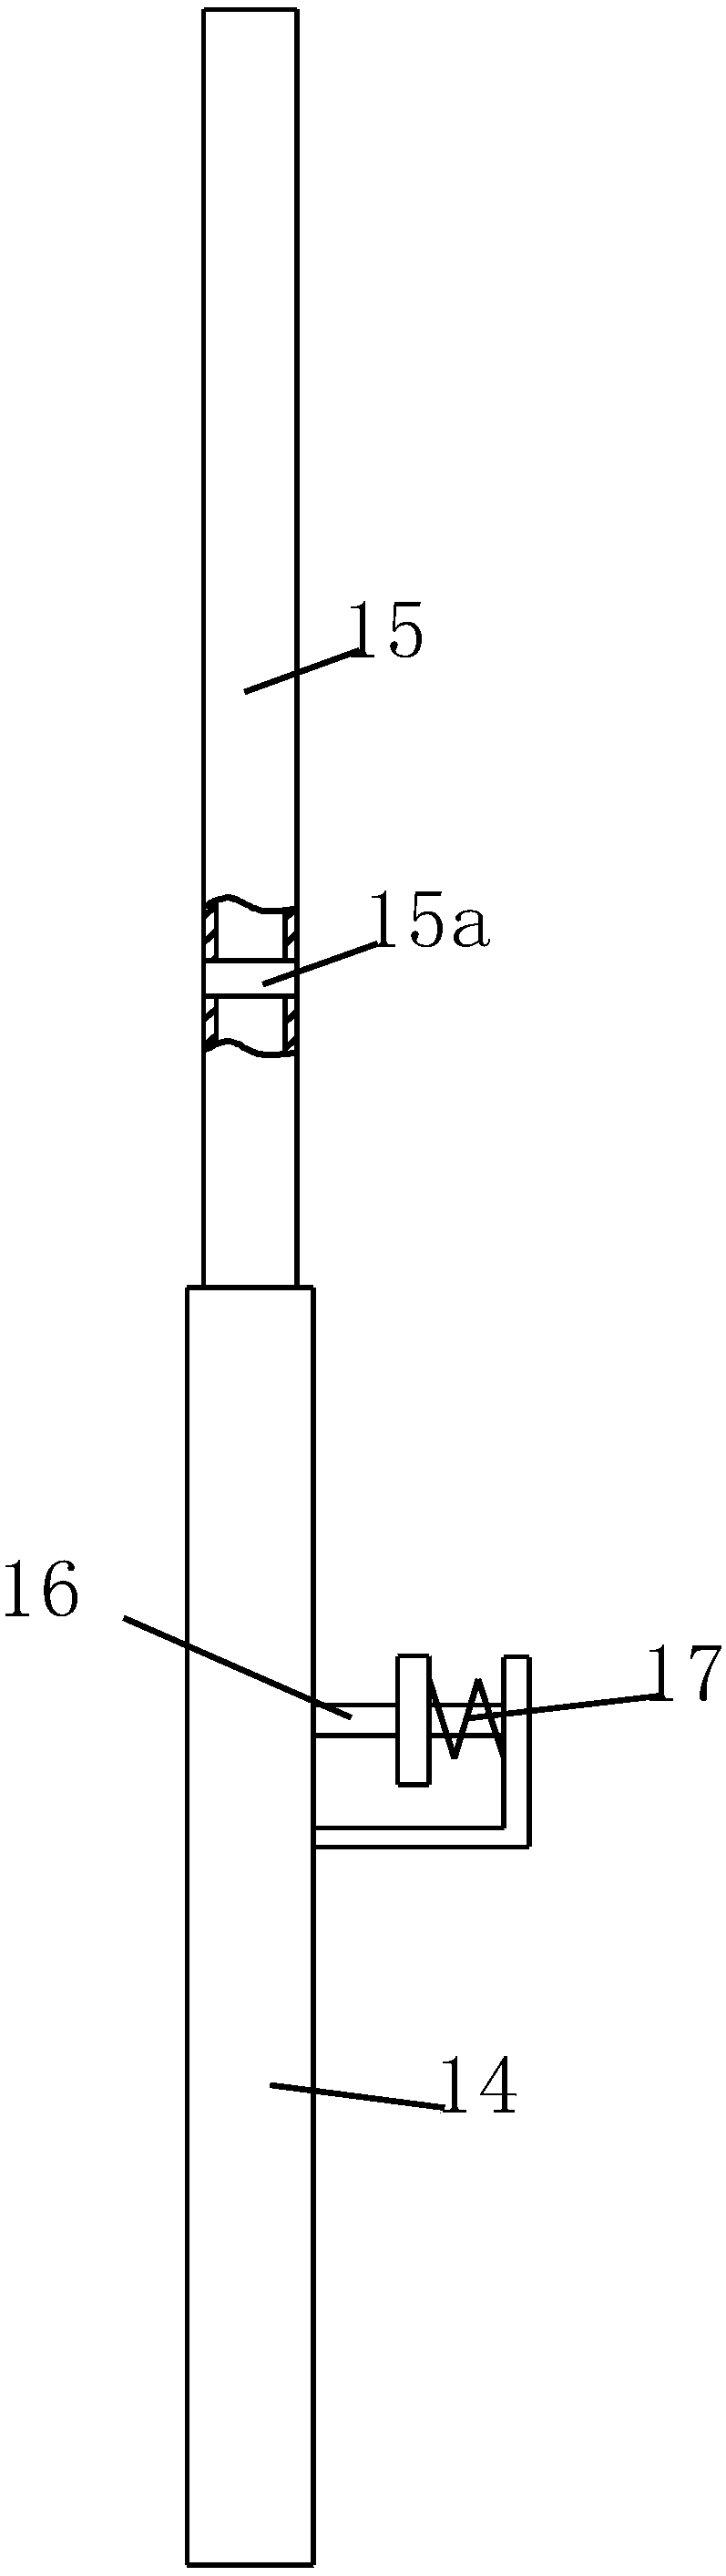 Watermelon seedling pollenator, and application method thereof